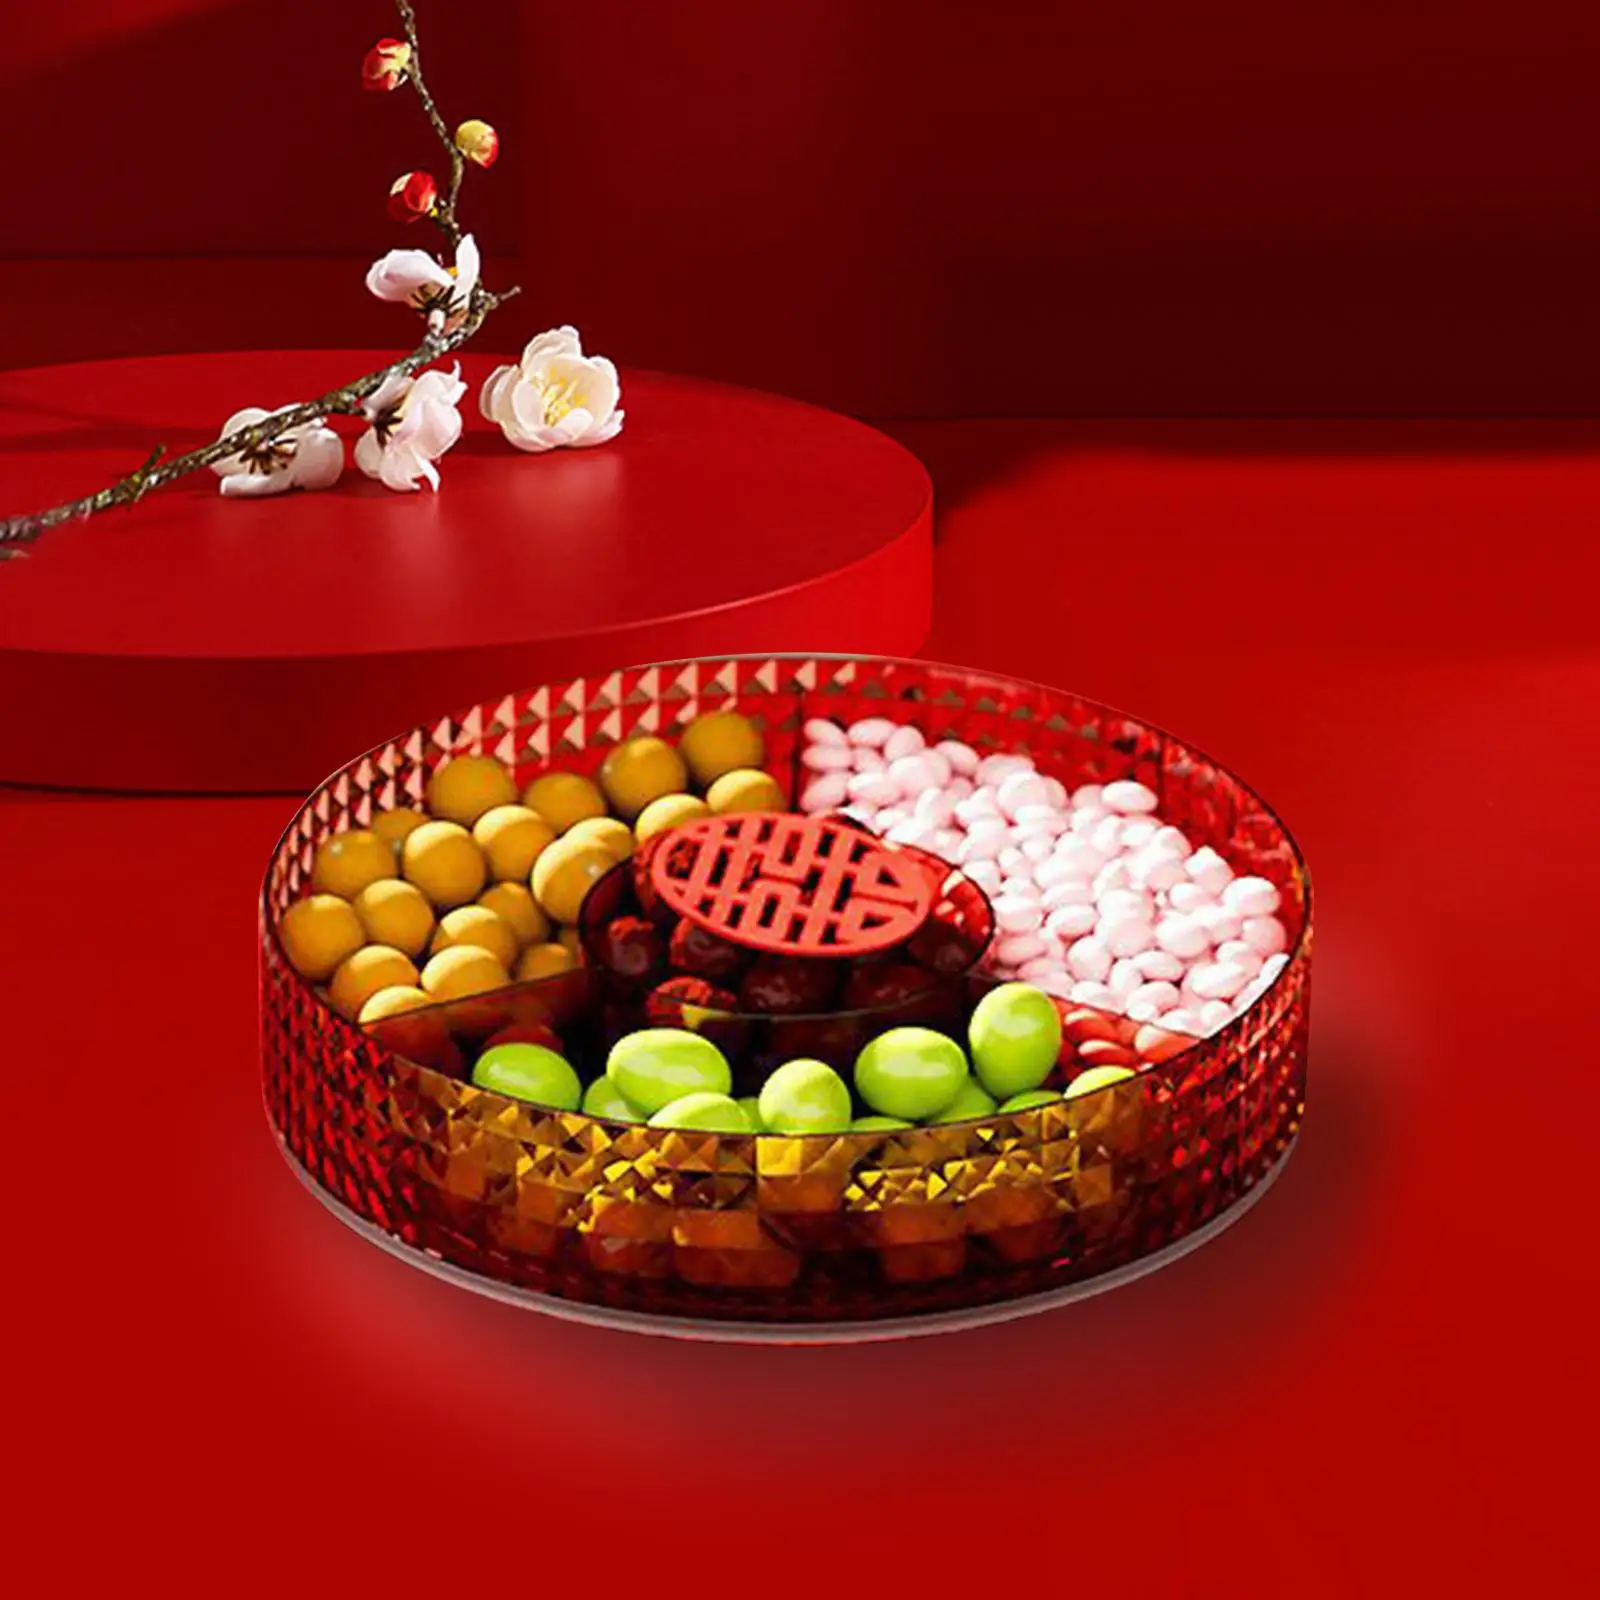 Round Snack Serving Tray Fruits Holder Box Nut Dried Fruits Platter Appetizer Tray Home Decoration for Living Room Party Kitchen